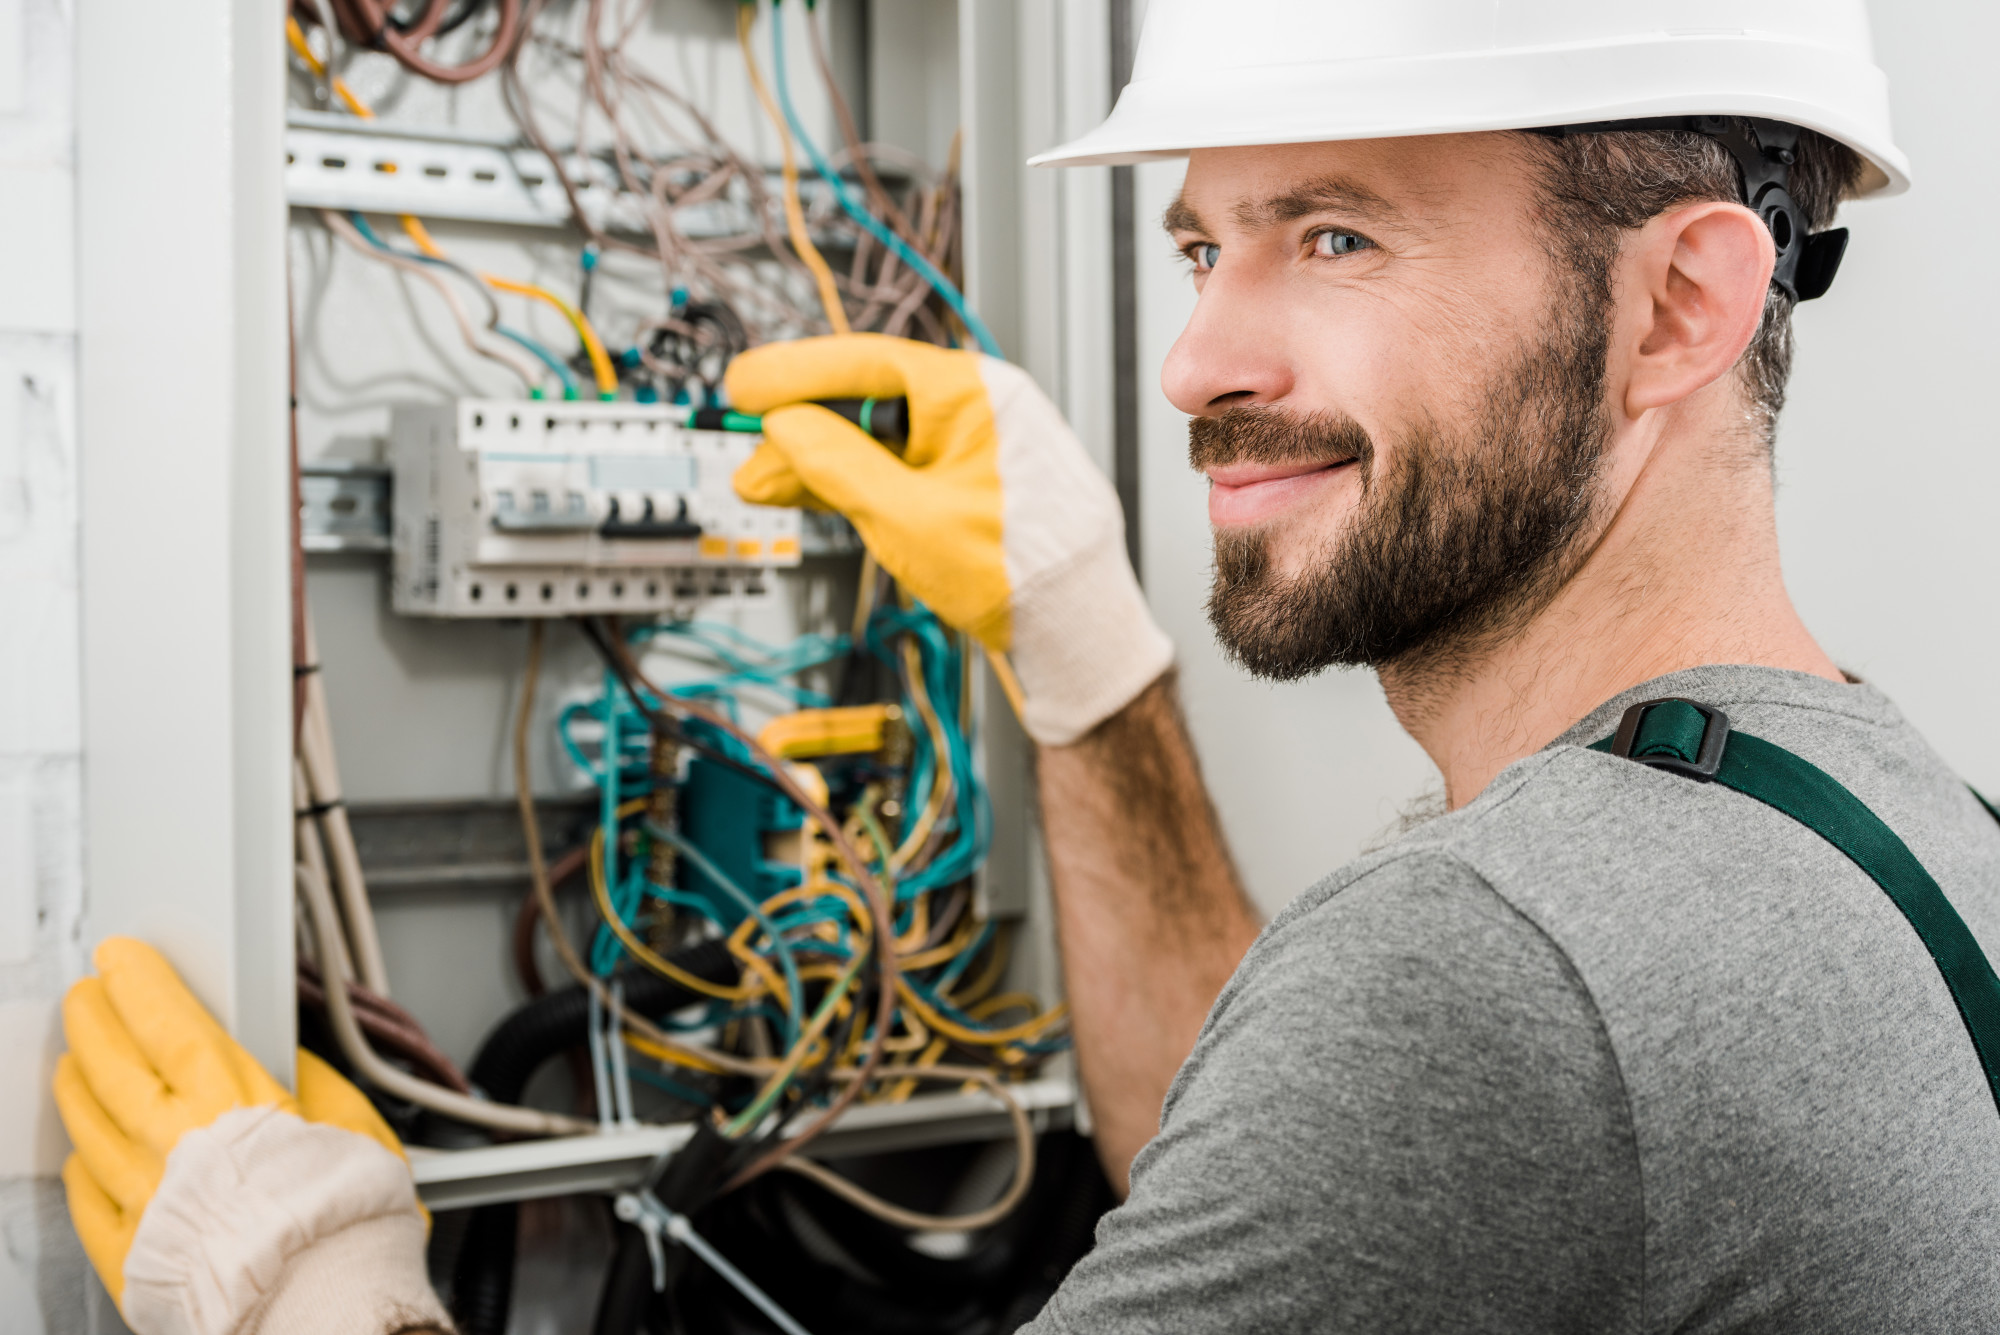 5 Simple Tips to Find a Good Electrician for Your Home